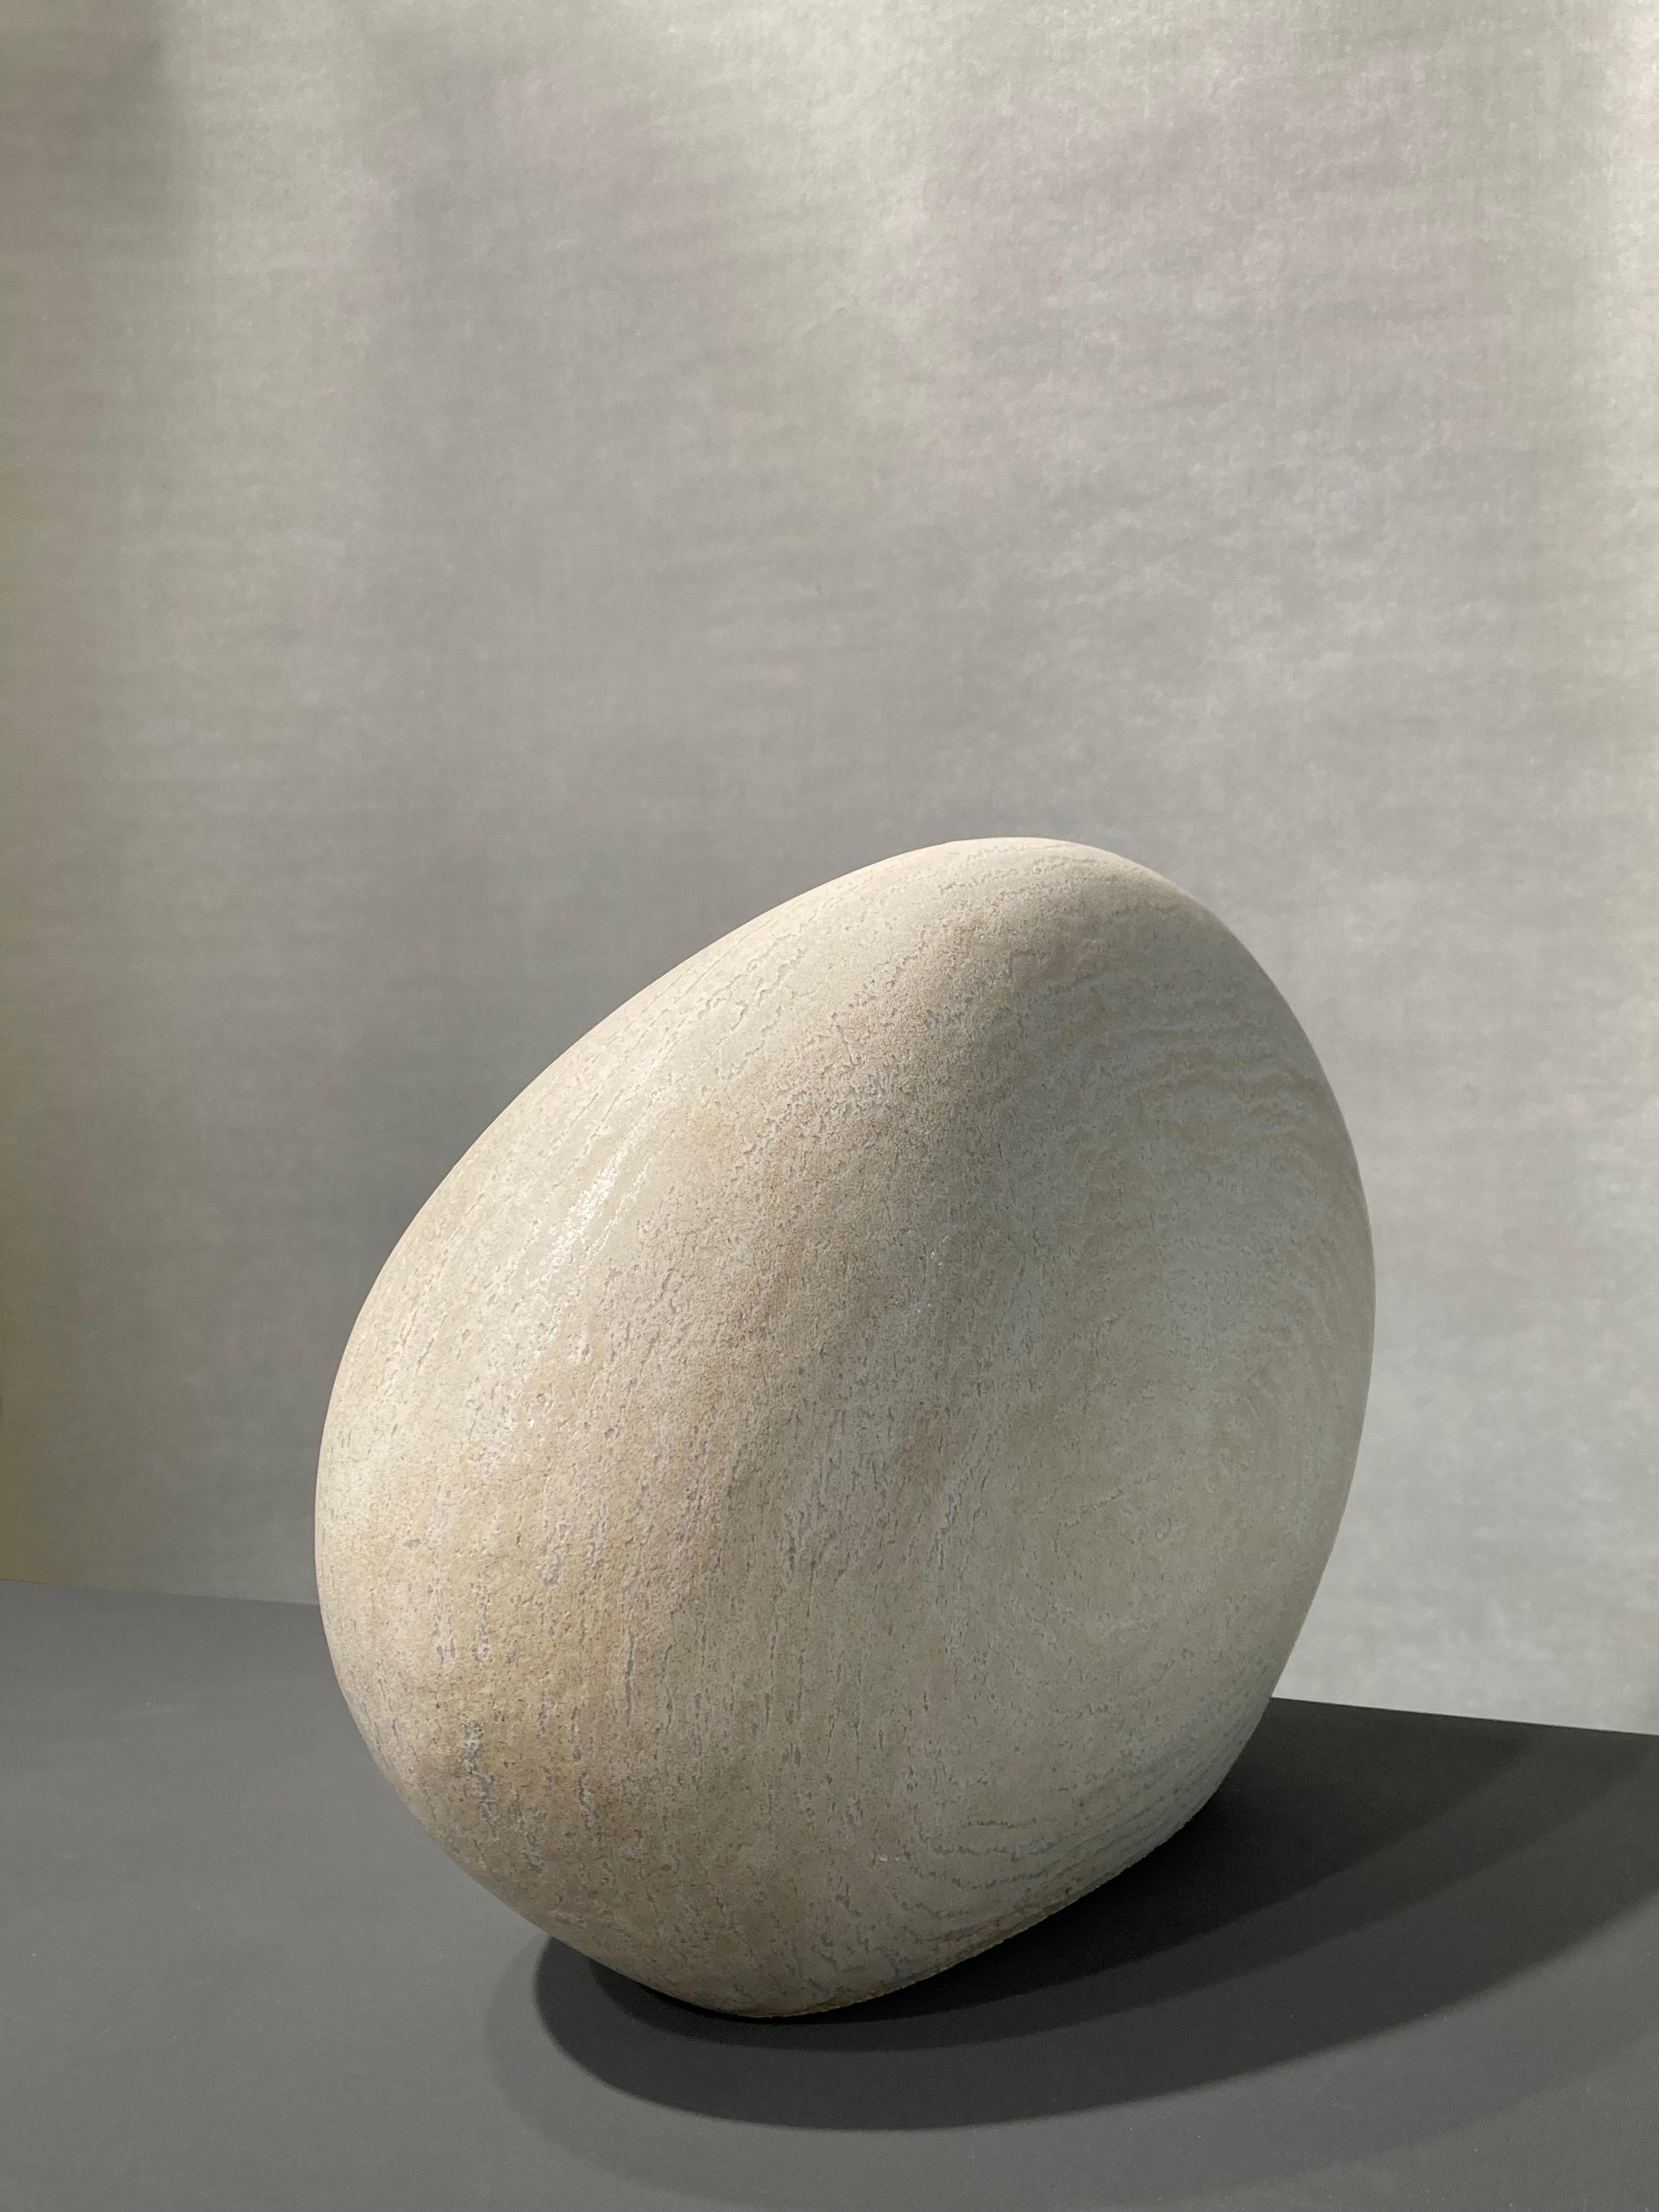 Oval white form with traces - Contemporary Sculpture by Maria Vlandi